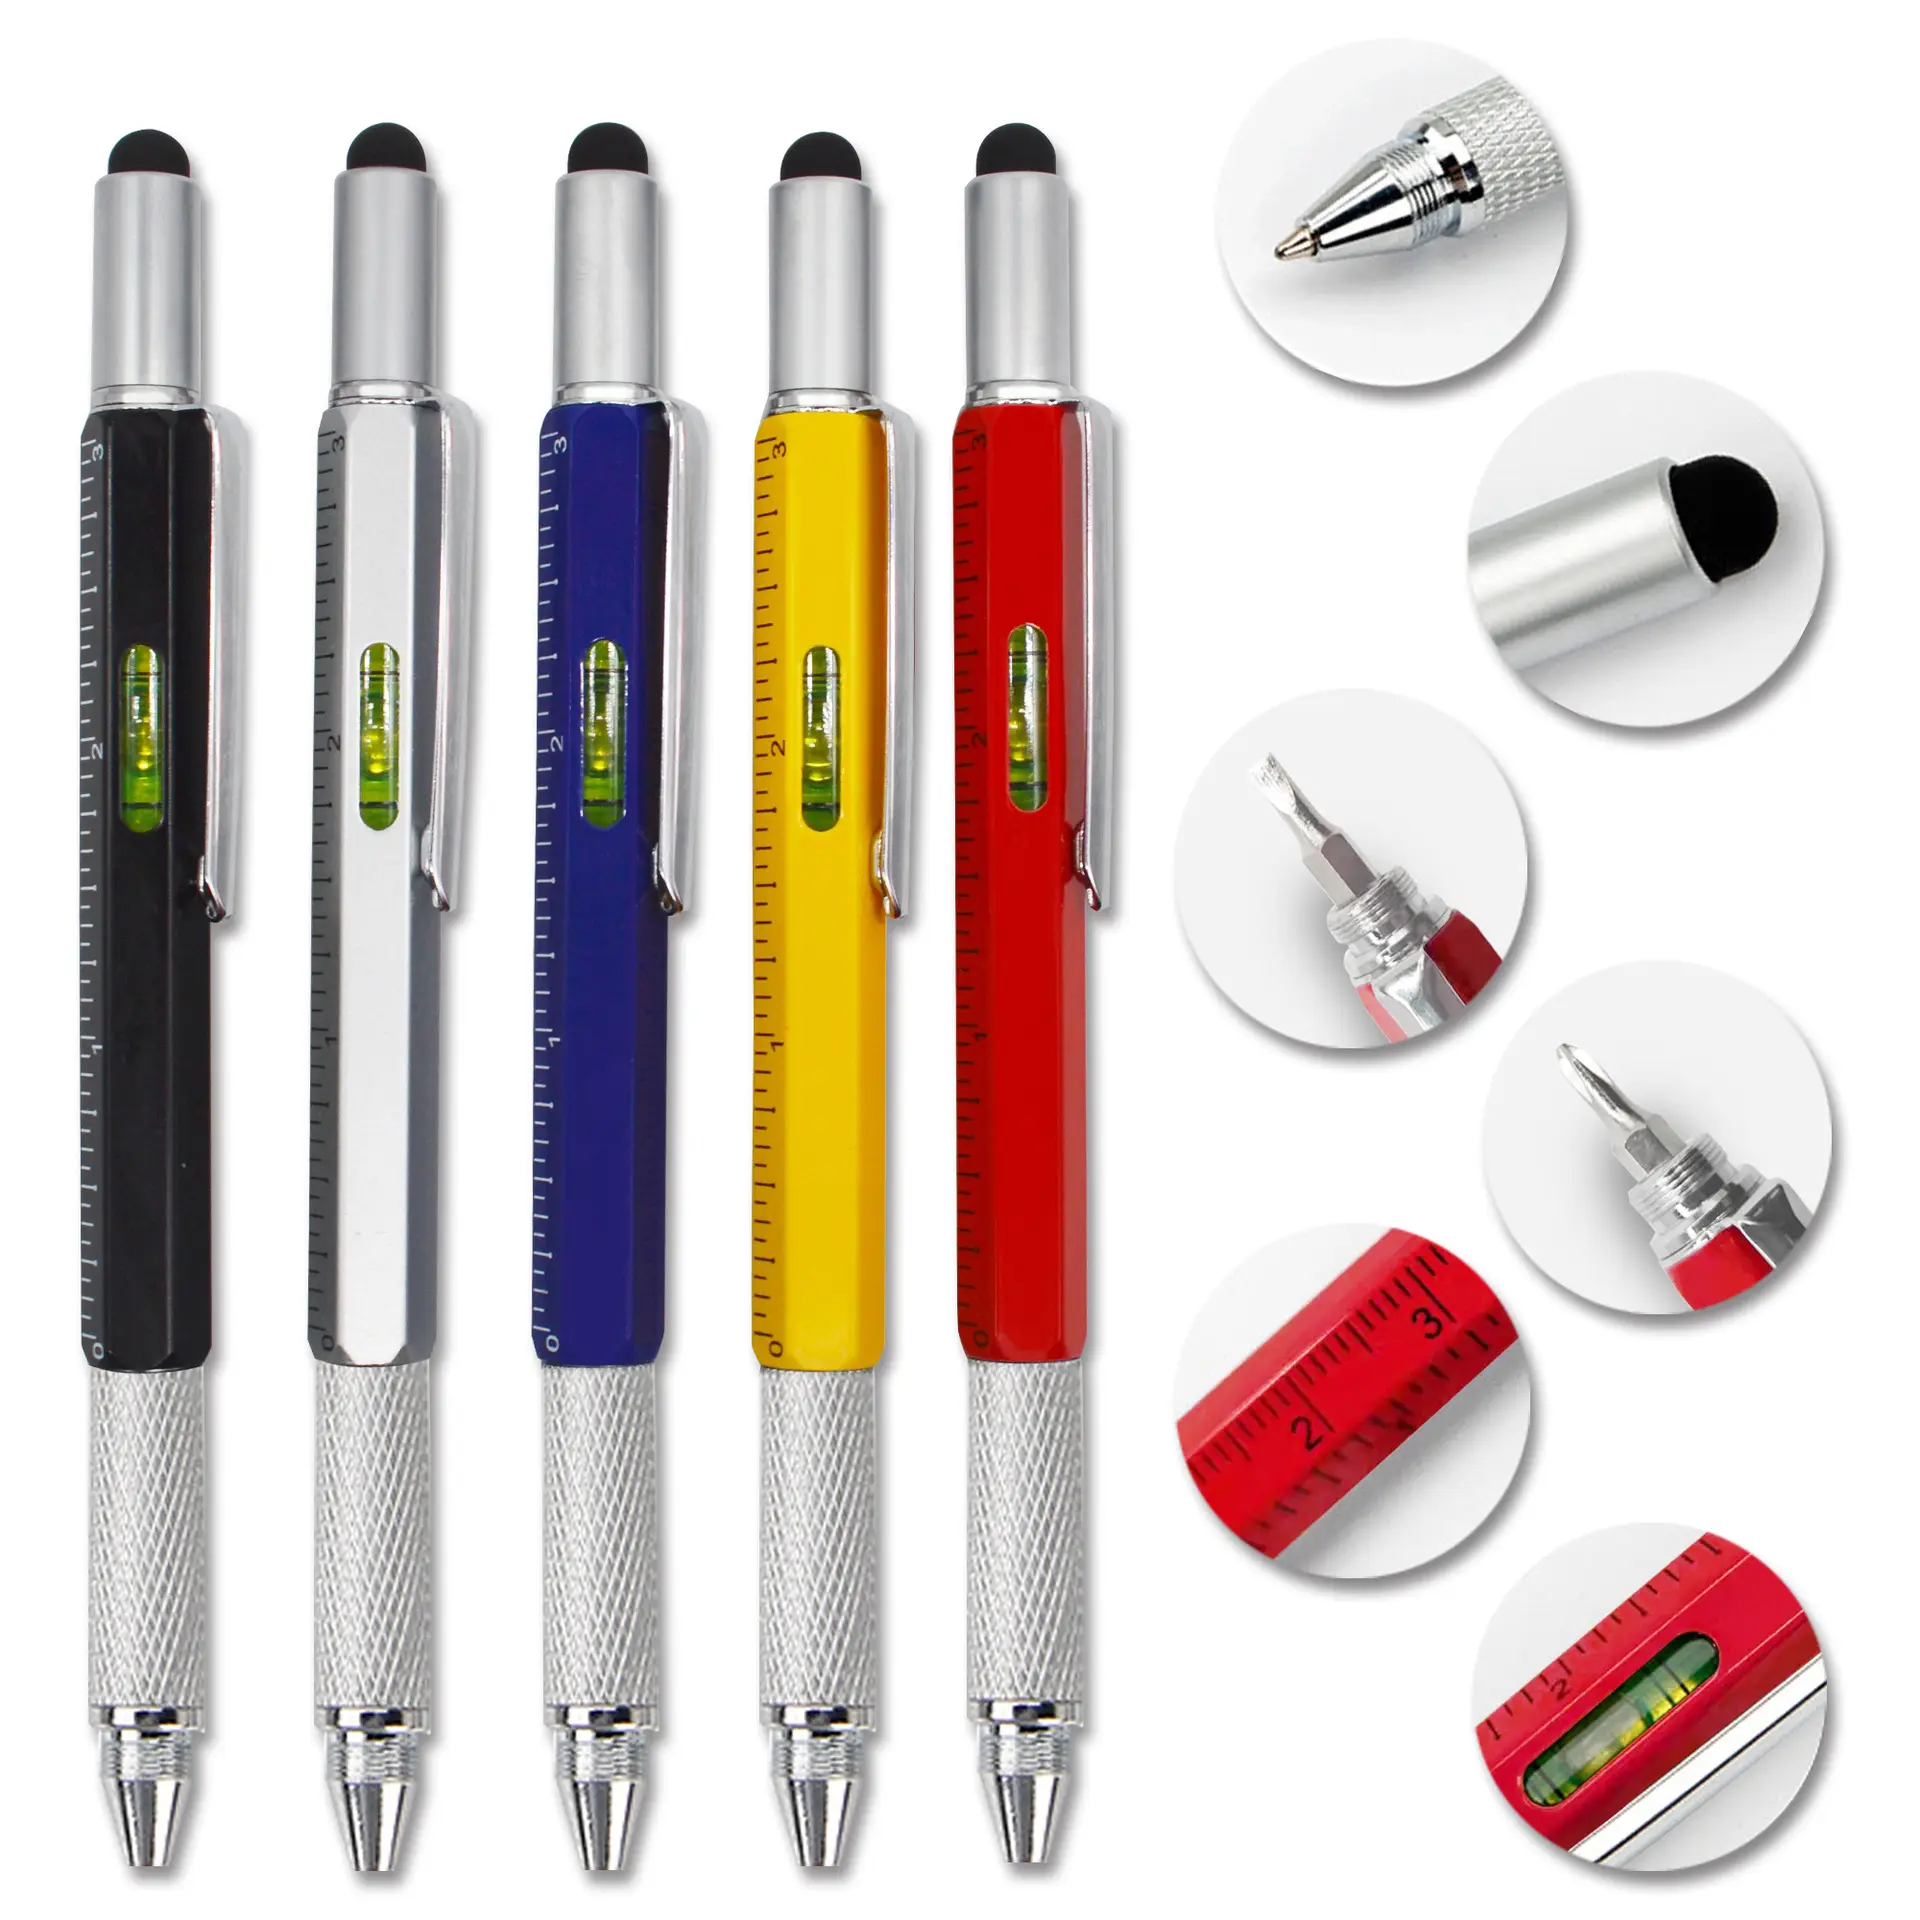 2023 New 6 in 1 multitool pen Multifunction tool stylus pen with screwdriver level tool pen with LOGO